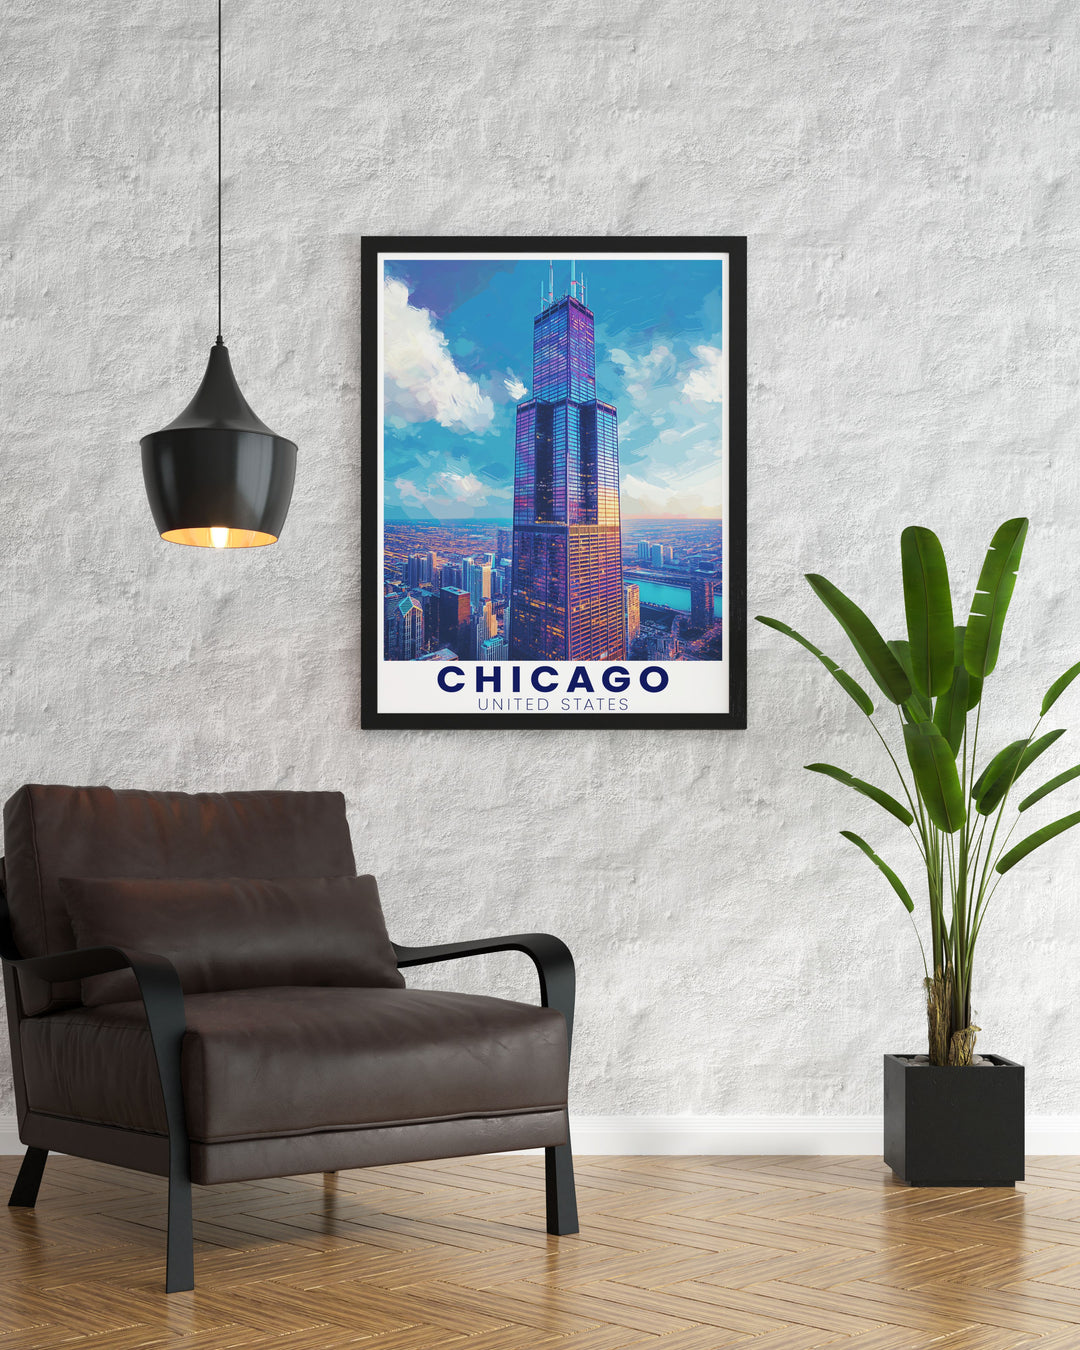 Stunning Willis Tower artwork with a detailed Chicago cityscape making it a perfect addition to your home decor and a great Chicago gift for travel enthusiasts.